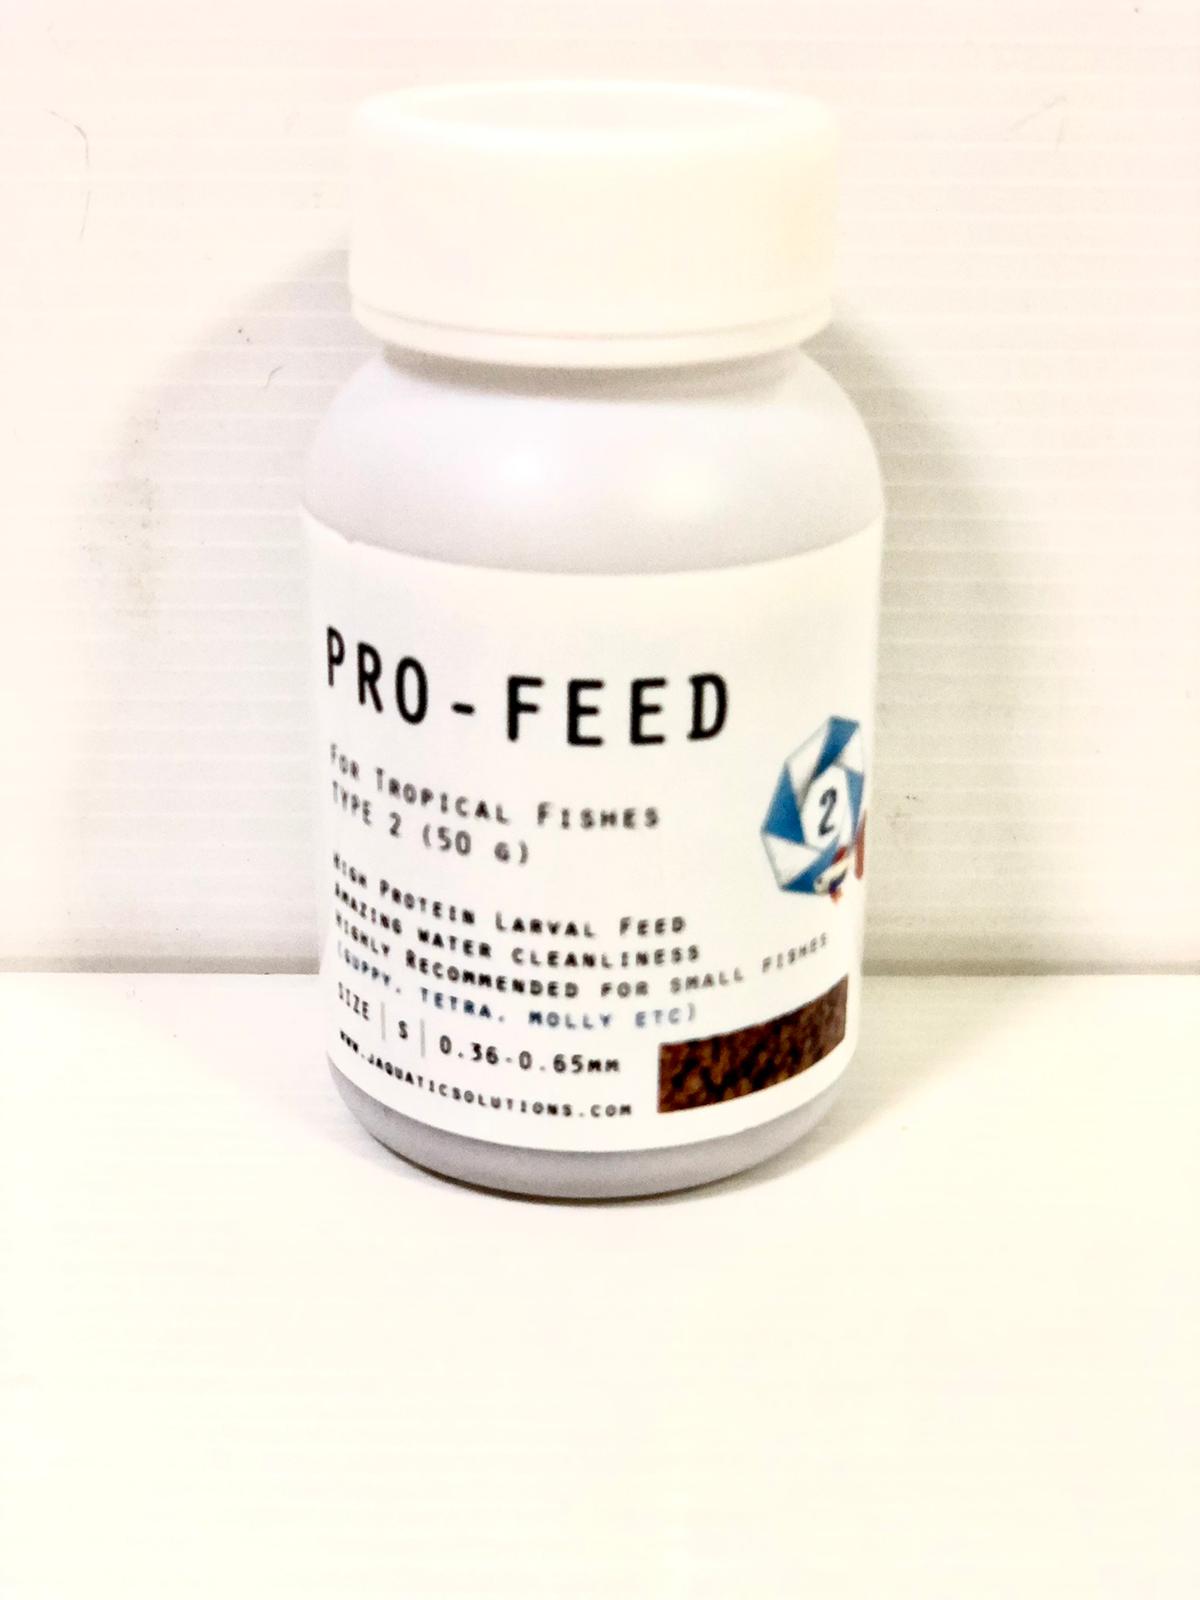 PRO-FEED for Tropical Fishes Type 2 (S) (50g)